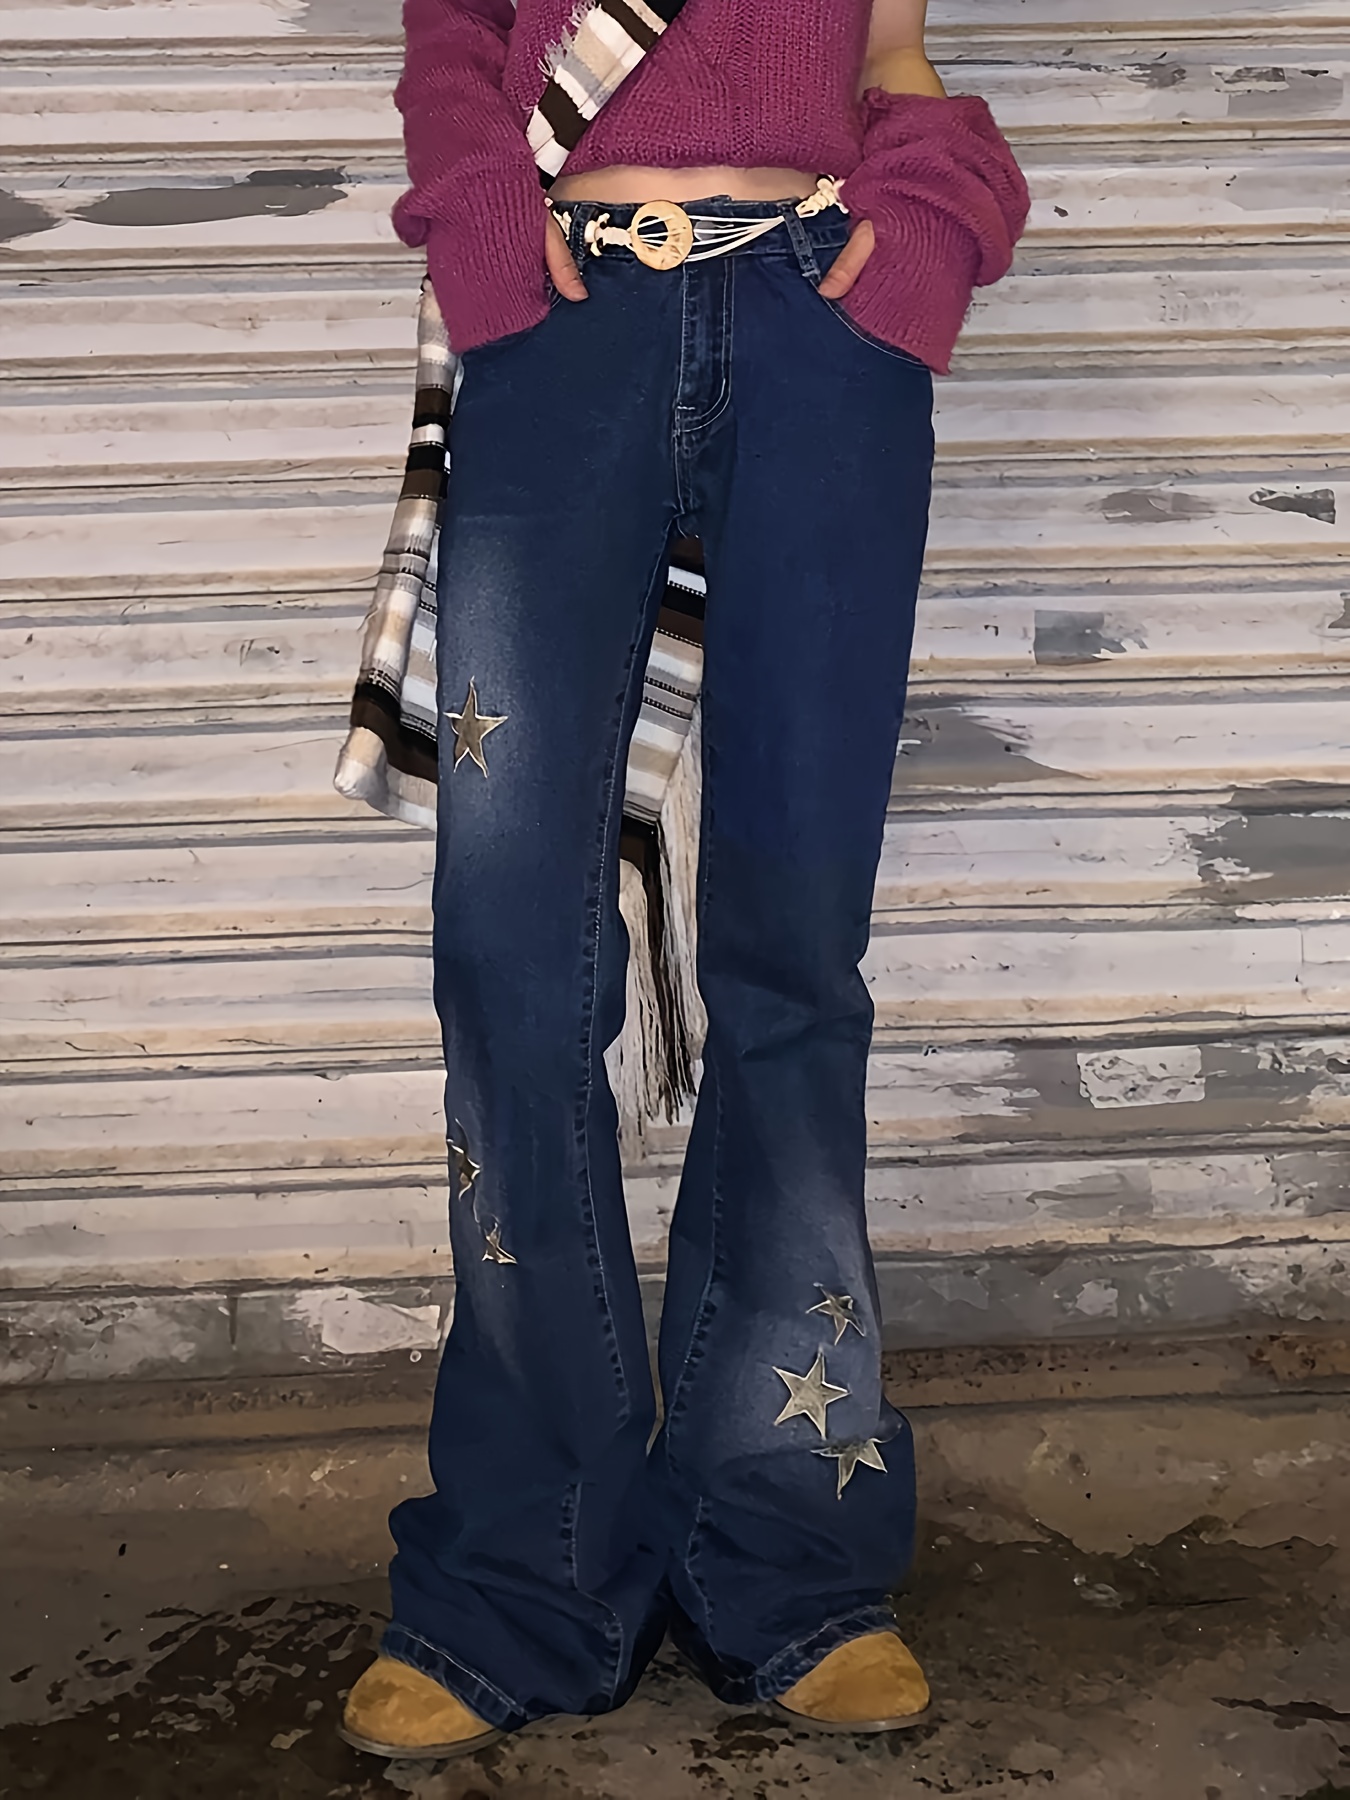 Star Stitched Pockets - Stretchy High Waisted Jeans - The Rose